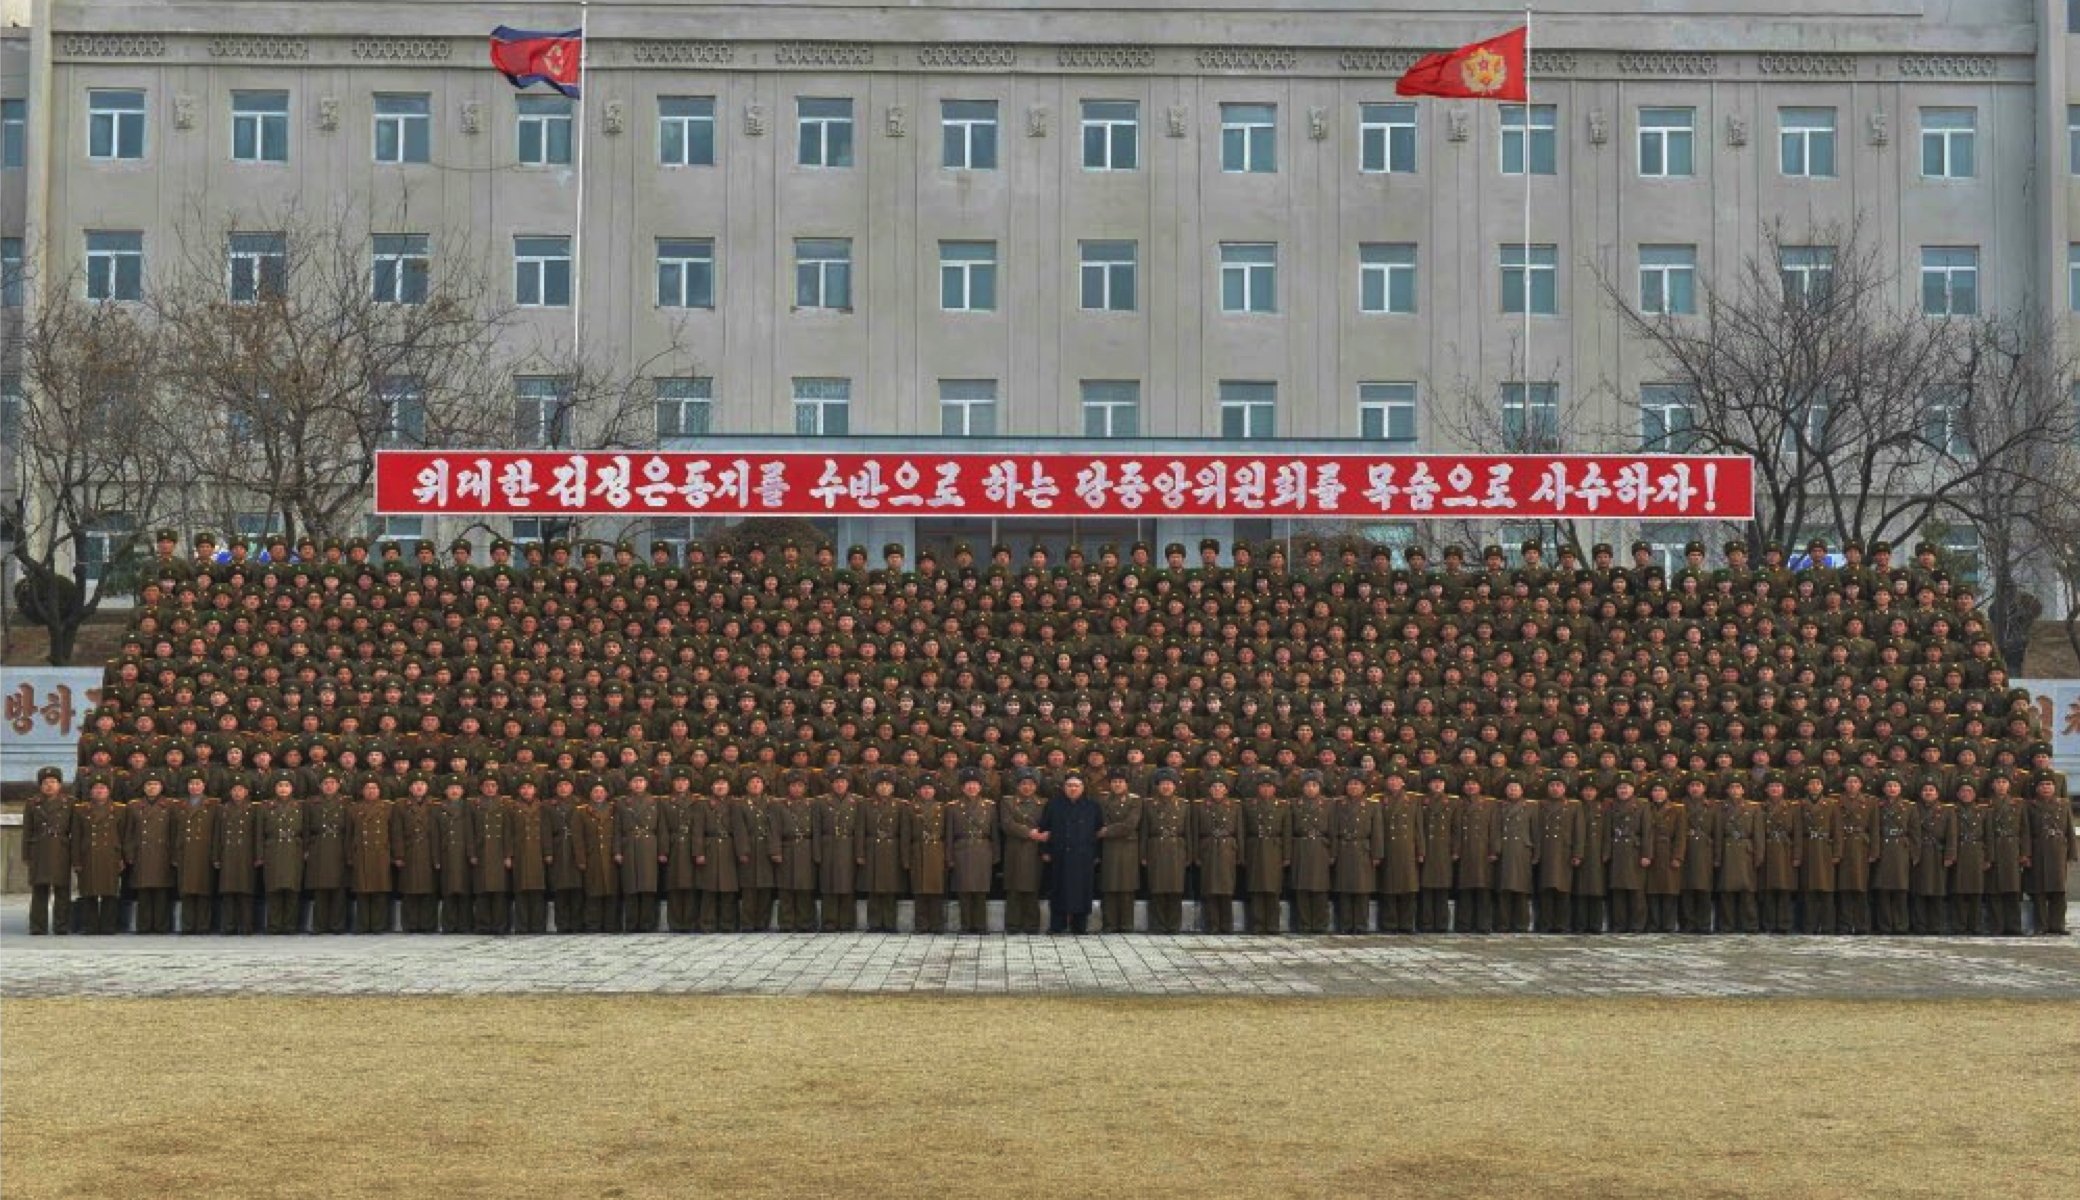 Kim Jong Un poses for a commemorative photo with command staff, service members and officers of KPA Large Combined Unit #966 in a photo which appeared on top-center of the front page of the March 1, 2017 edition of the WPK daily organ Rodong Sinmun